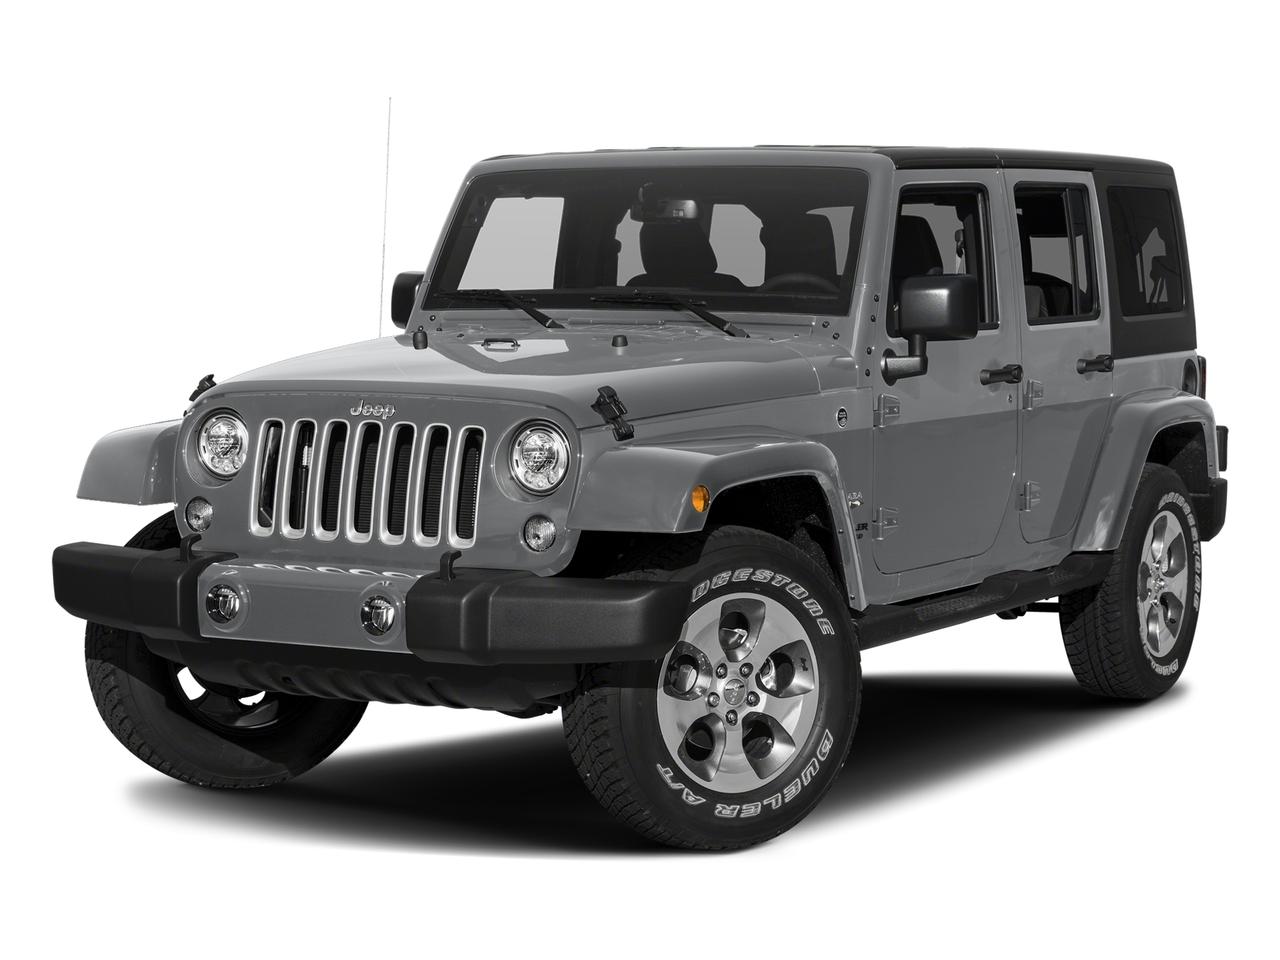 2017 Jeep Wrangler Unlimited Vehicle Photo in Saint Charles, IL 60174